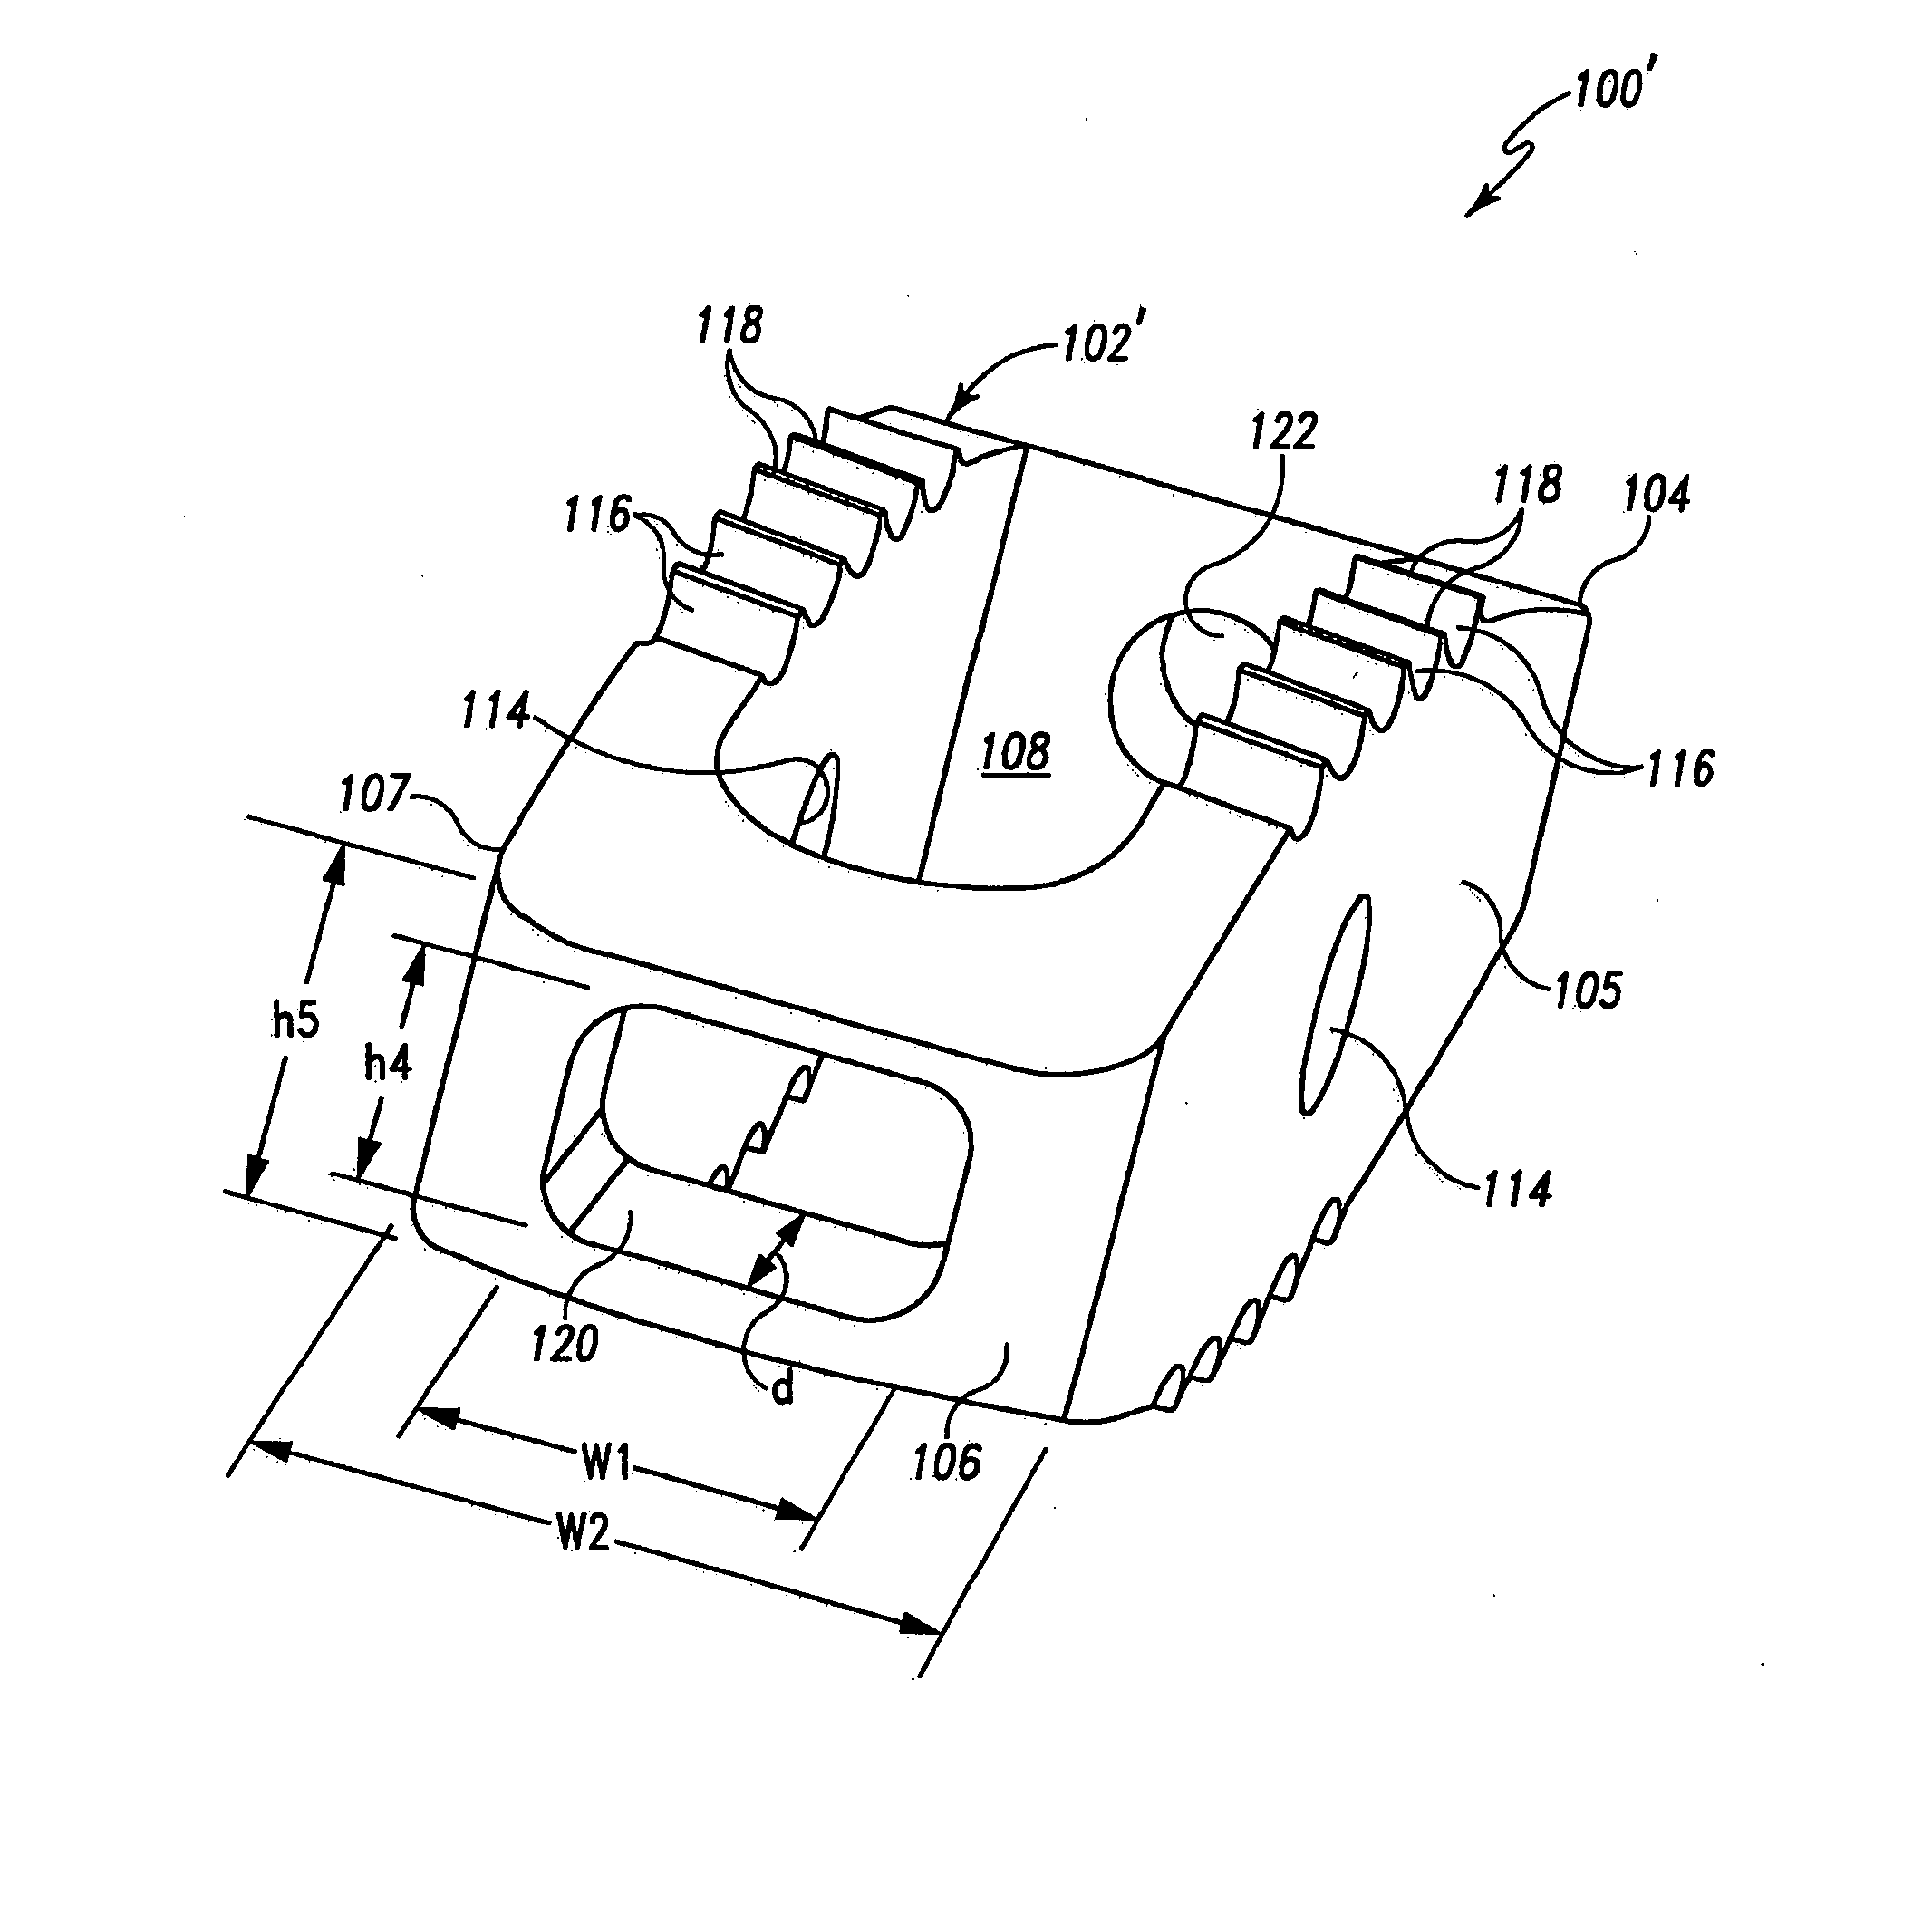 Interior connecting interbody cage insertional tools, methods and devices